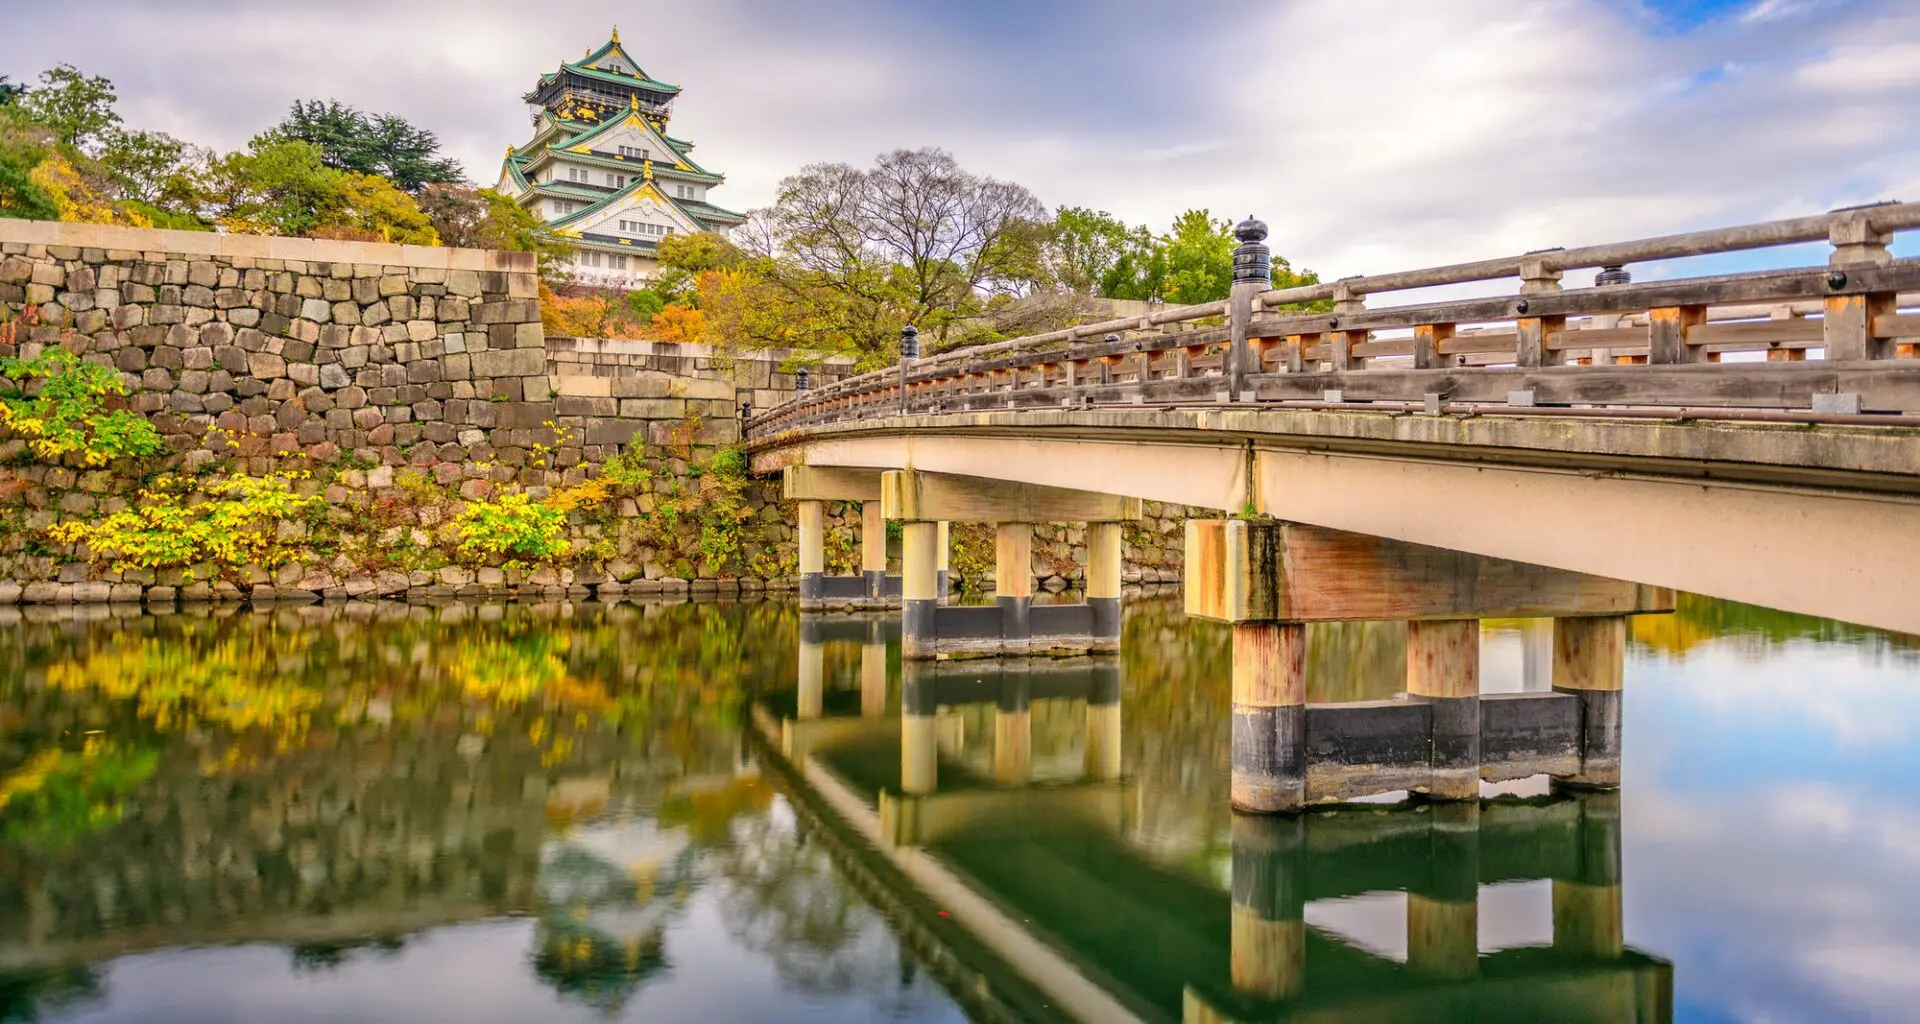 Osaka Castle reflected in the moat, with a traditional bridge in the foreground, during autumn in Osaka, Japan.